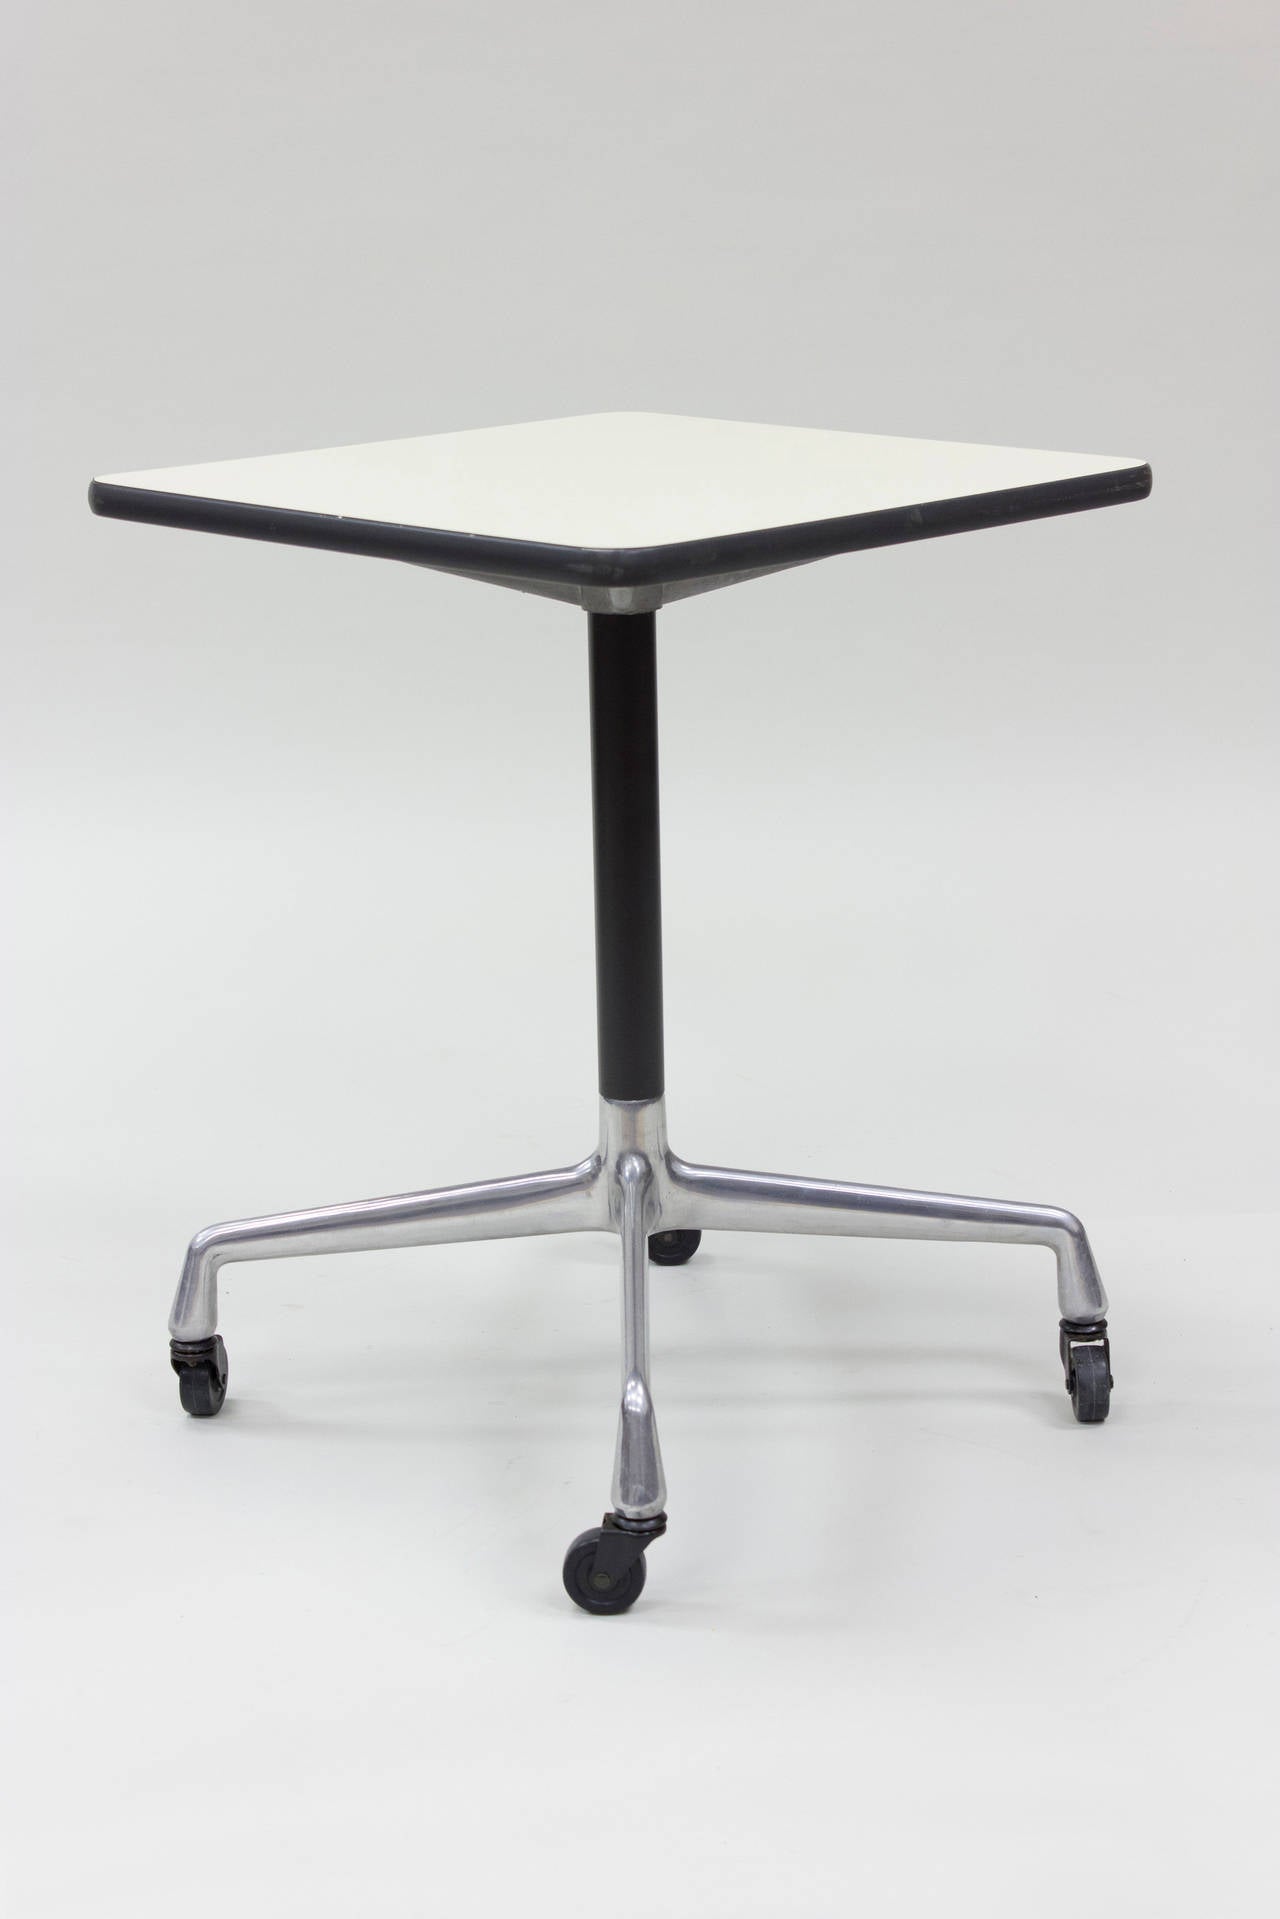 Great Eames Aluminum Group Contract table with castor base. White laminate top is in great condition and has Herman Miller tag to underside. This is the perfect task table for the office or kitchen.